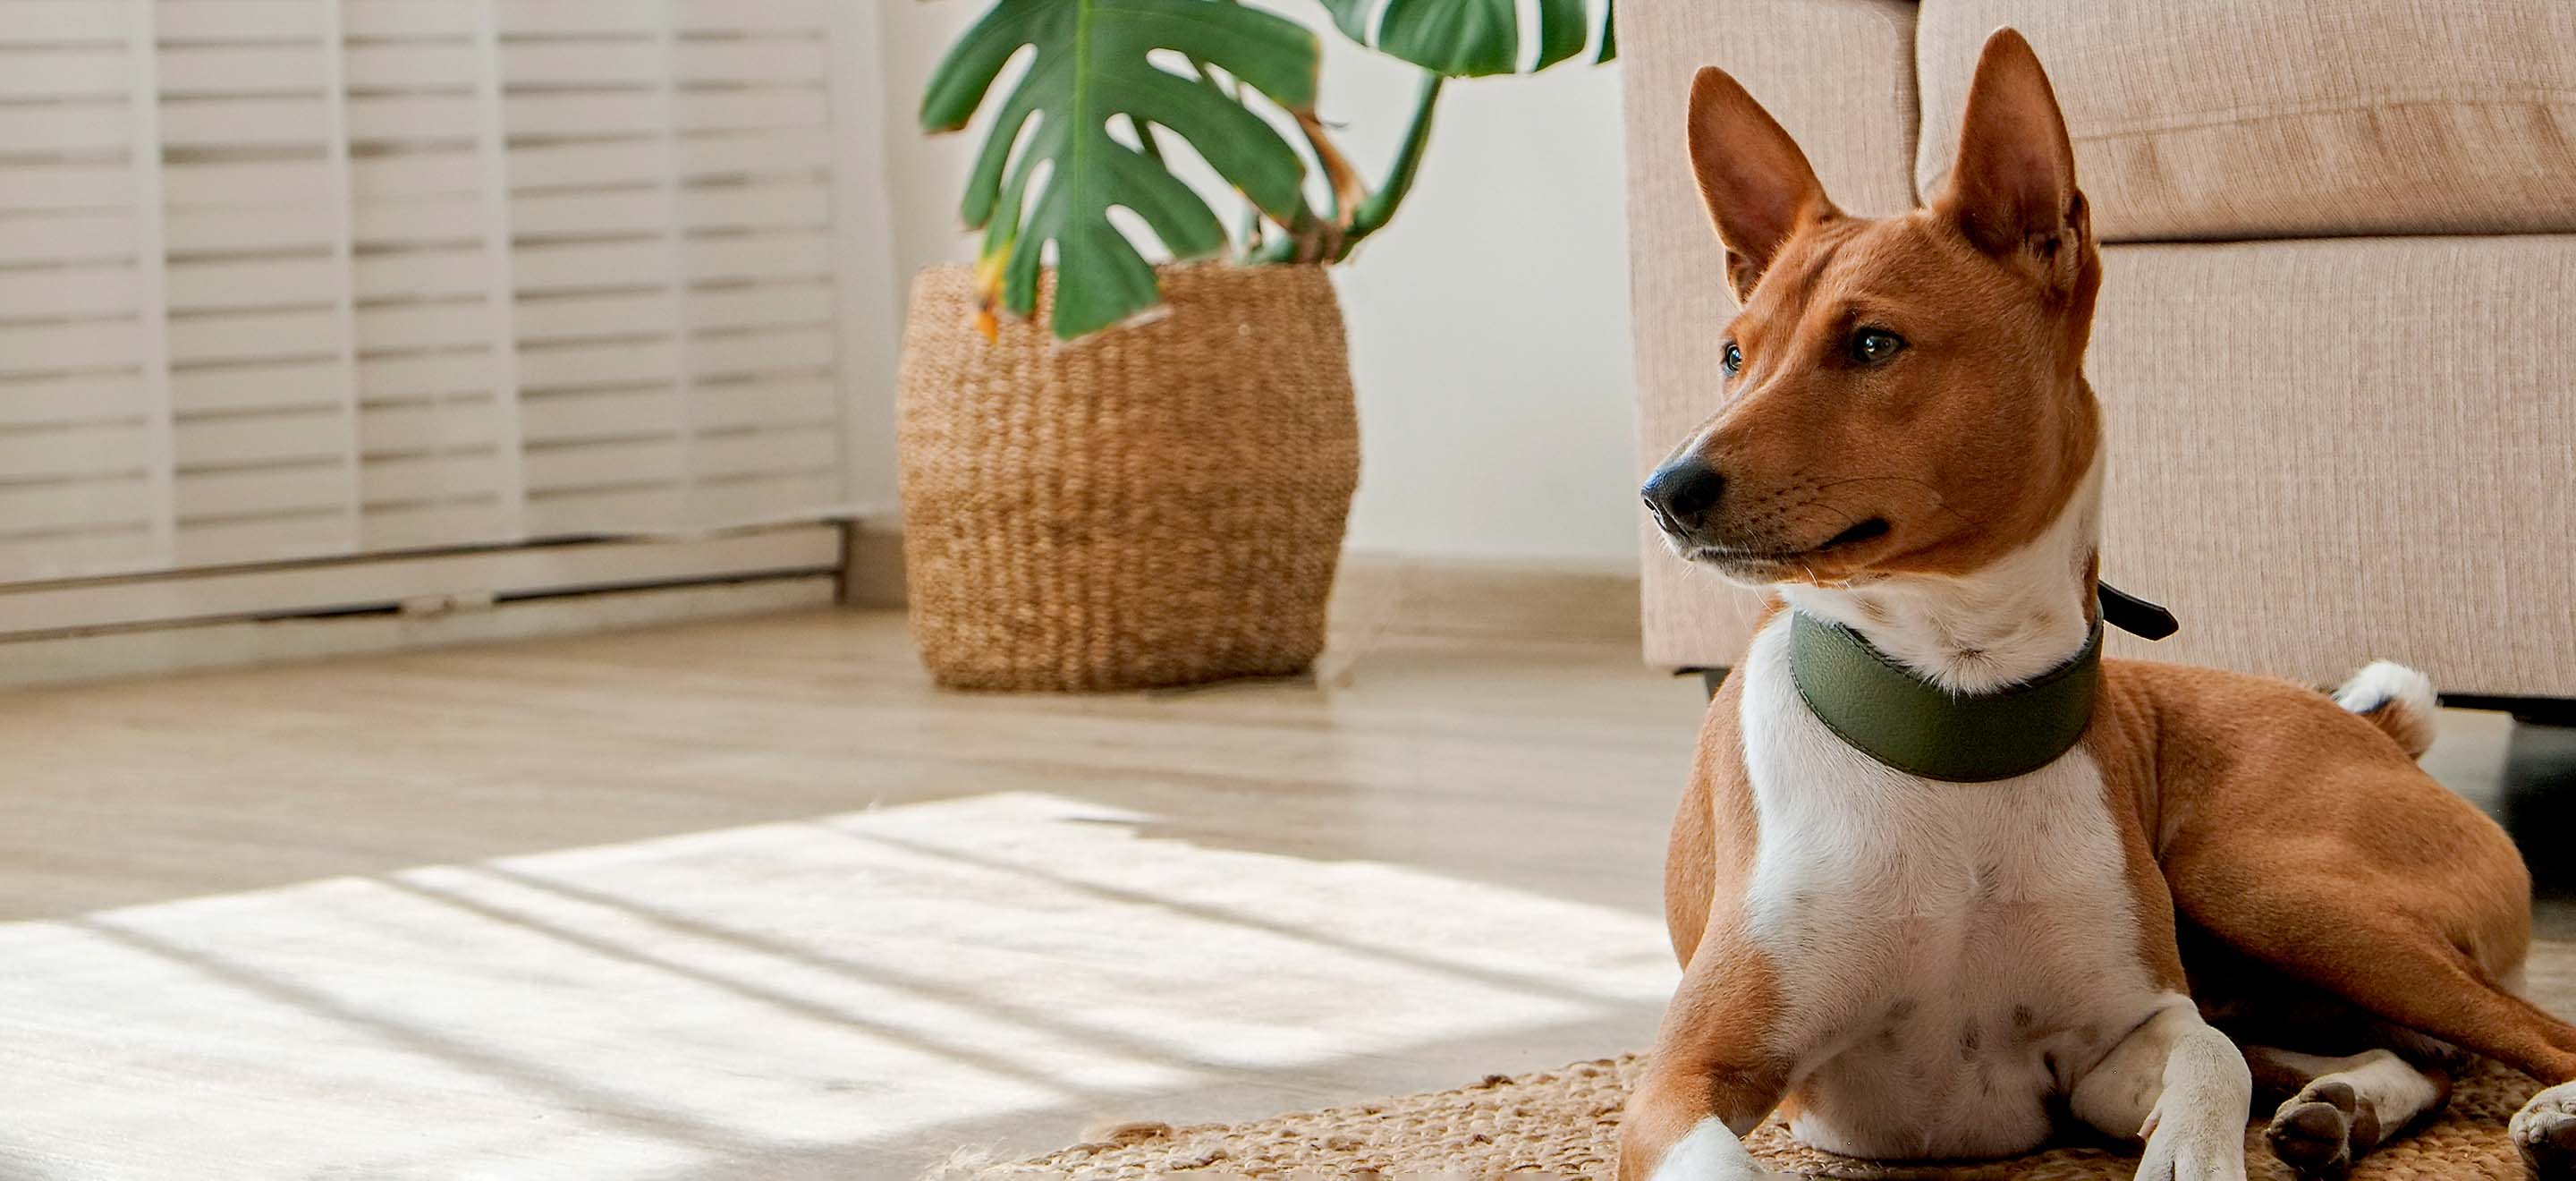 Basenji dog wearing a thick green collar laying on the living room floor next to a potted Monstera plant image